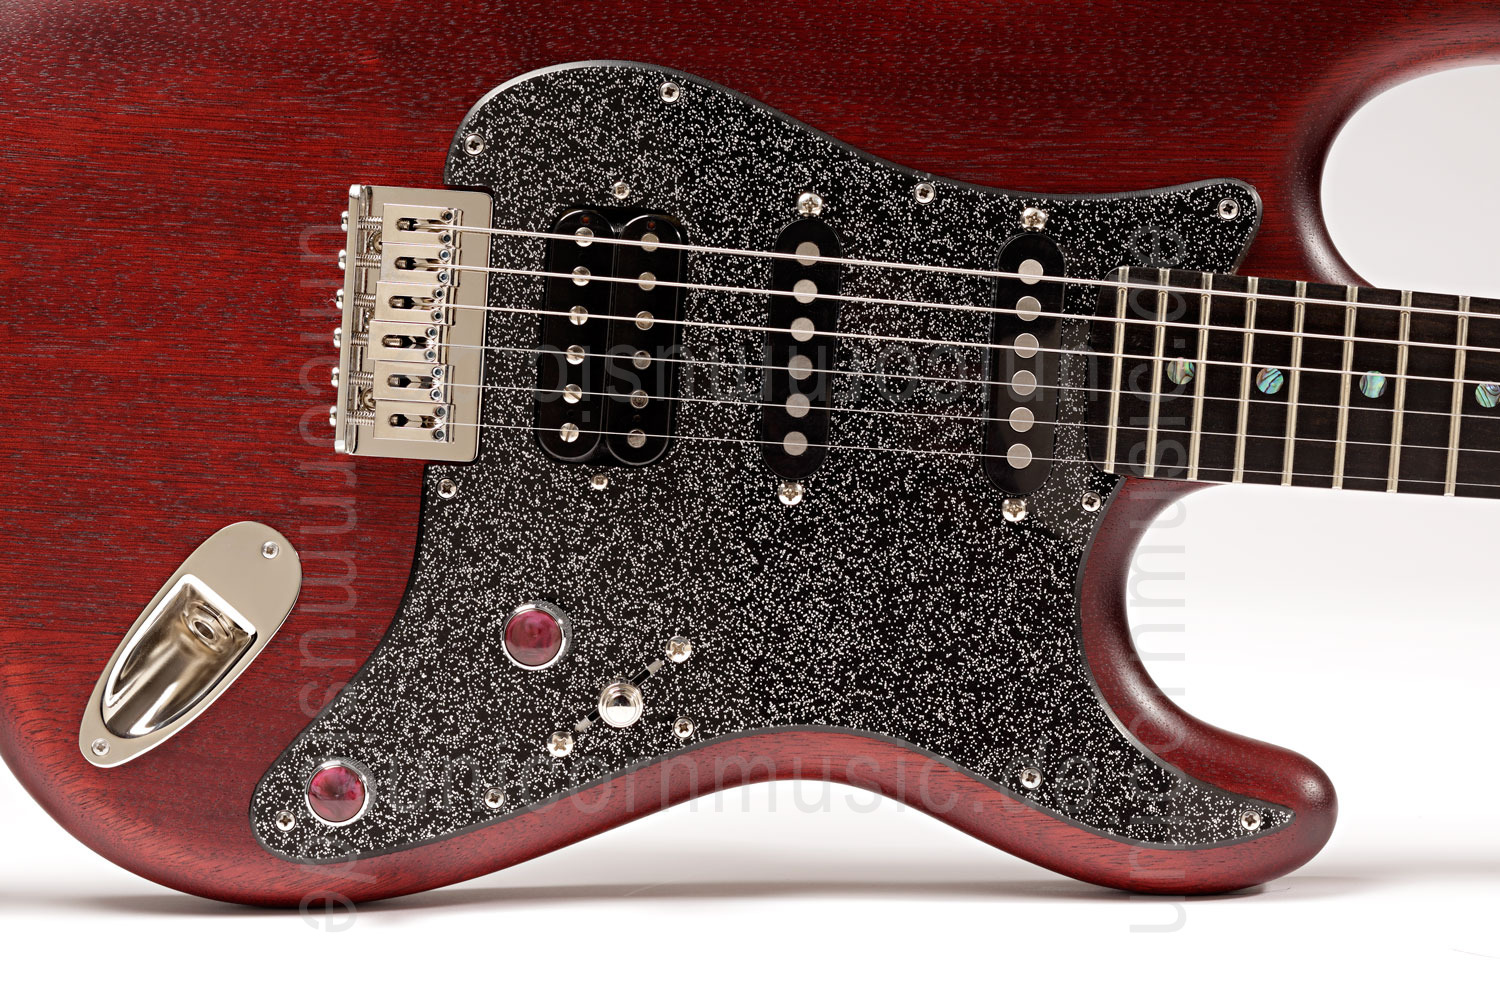 to article description / price Electric Guitar BERSTECHER Deluxe 2018 - Black Cherry / Black Sparkle + hard case - made in Germany